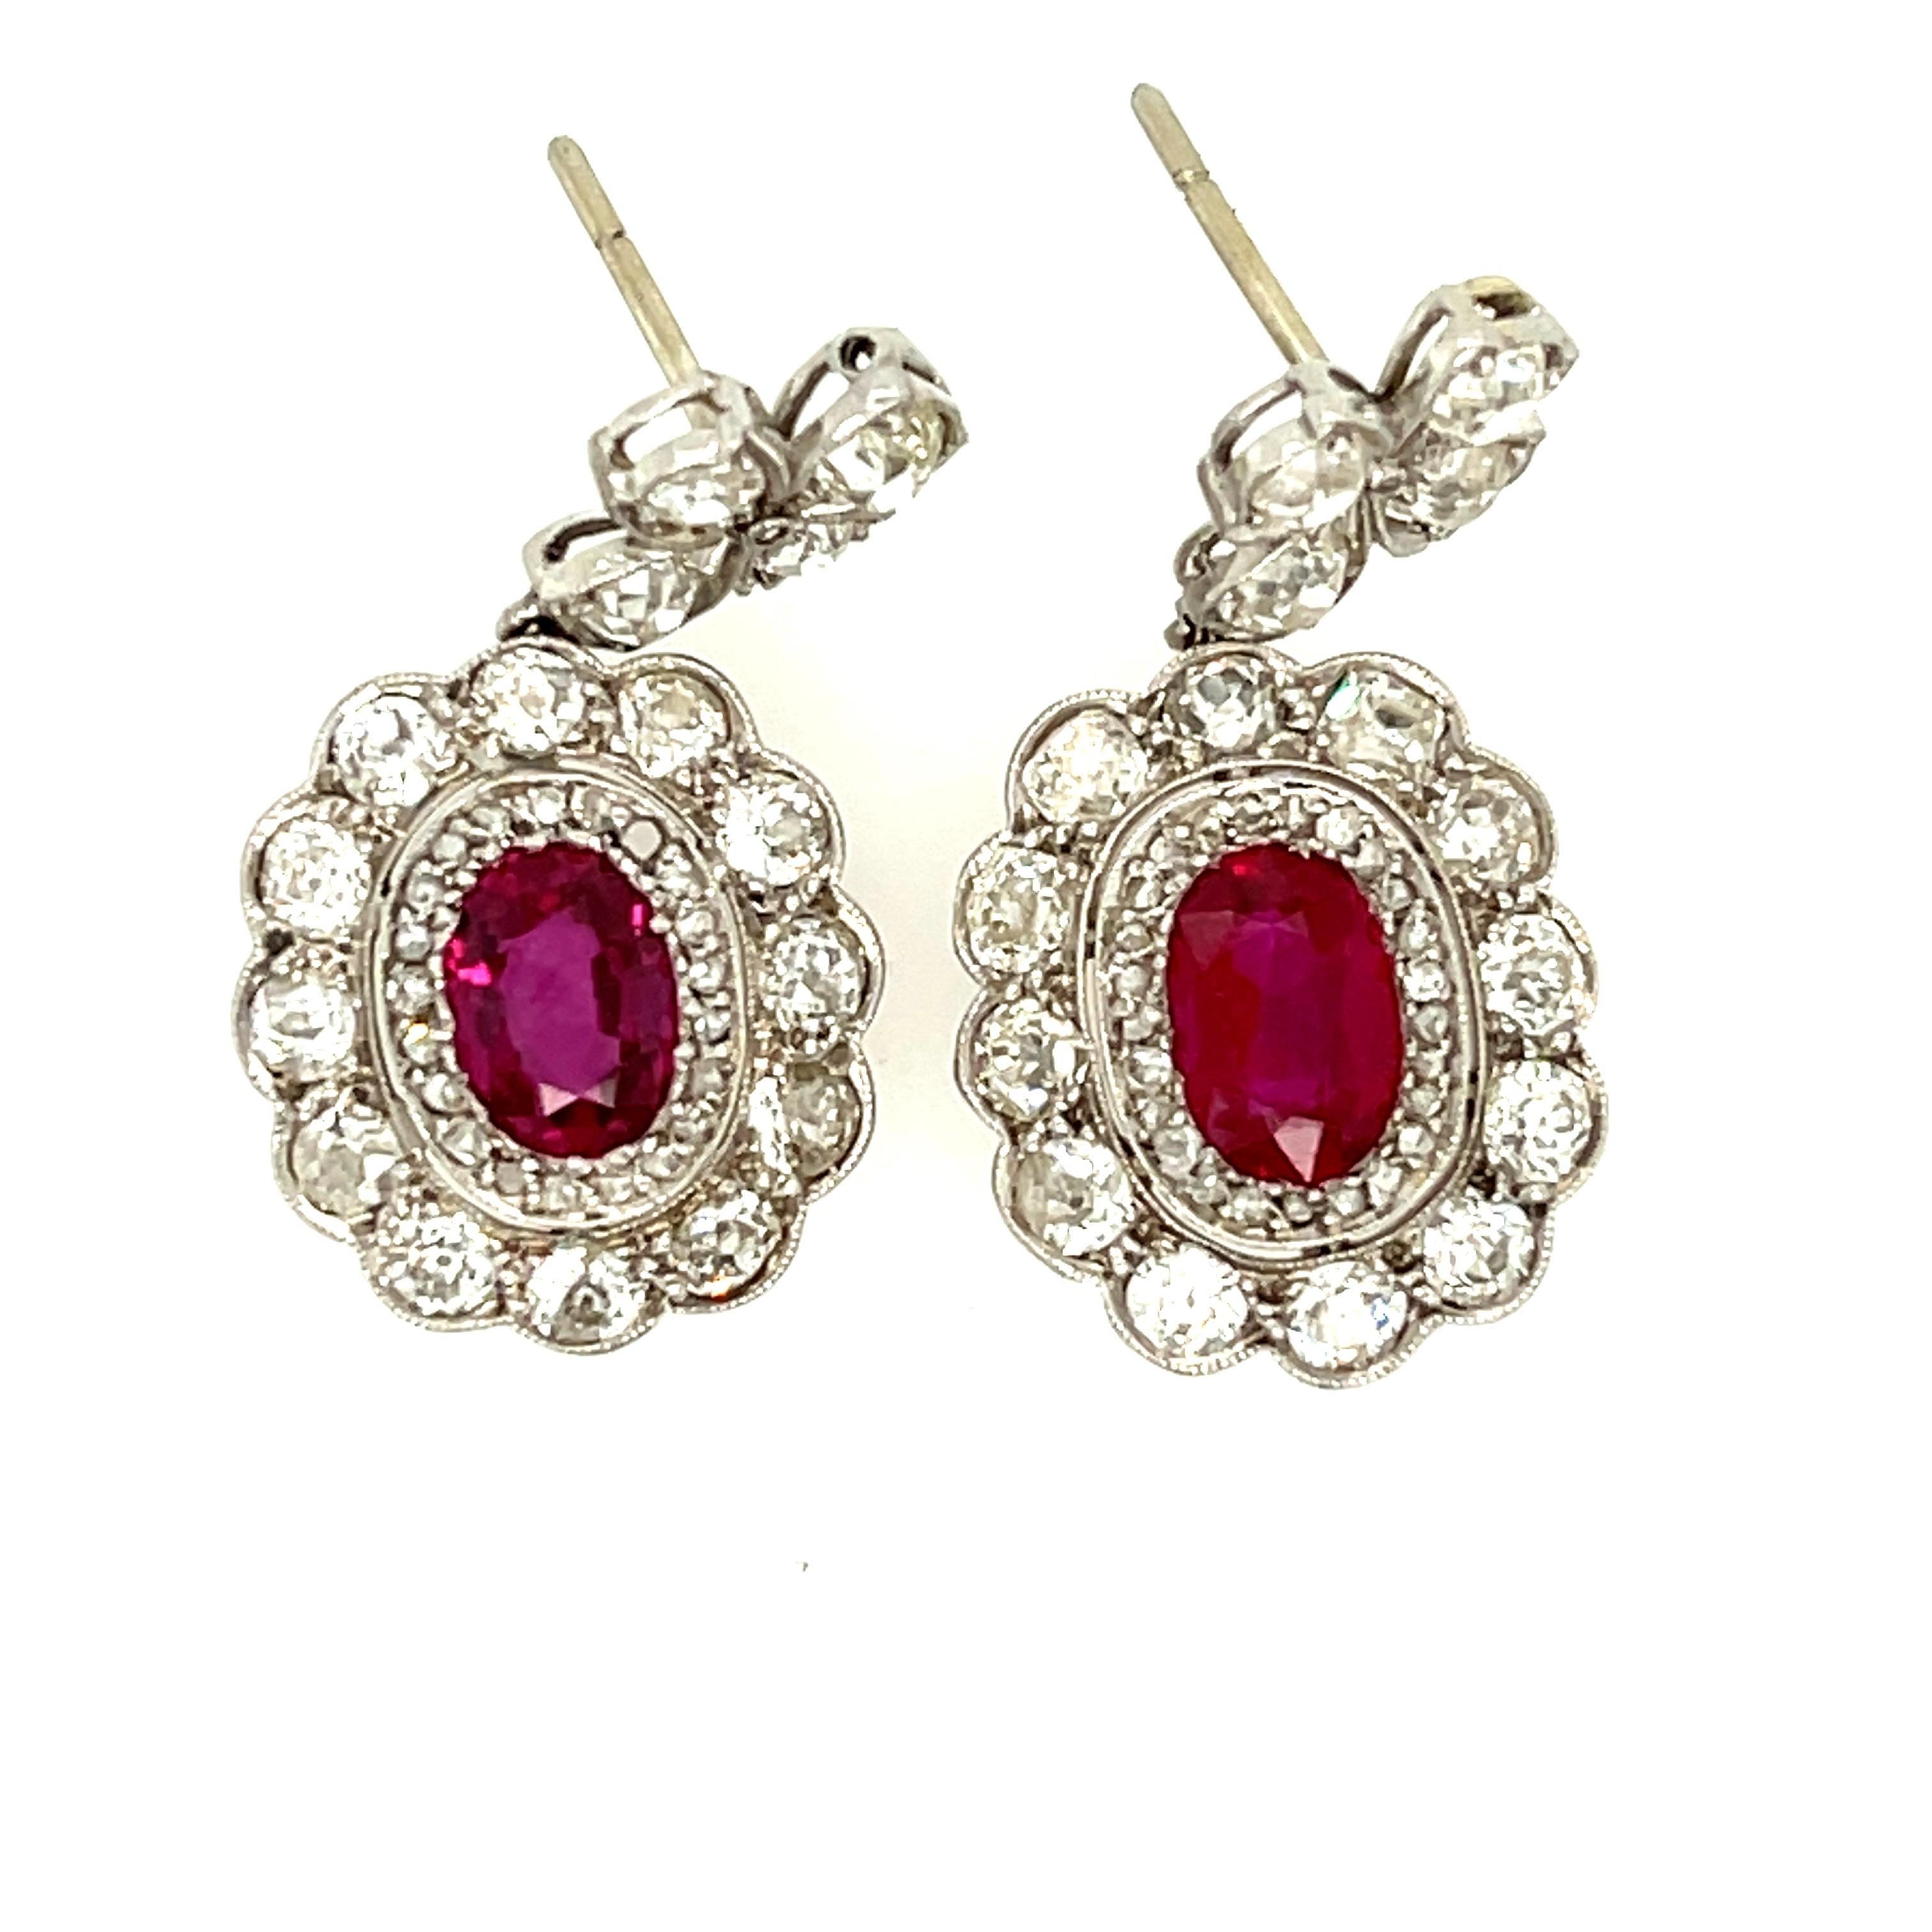 A pair of antique Edwardian platinum and diamond Burma ruby earrings, circa 1910. These lovely earrings feature a cluster of diamonds surrounding oval rubies hanging from a diamond floral motif top. The oval rubies are a rich red, weighing